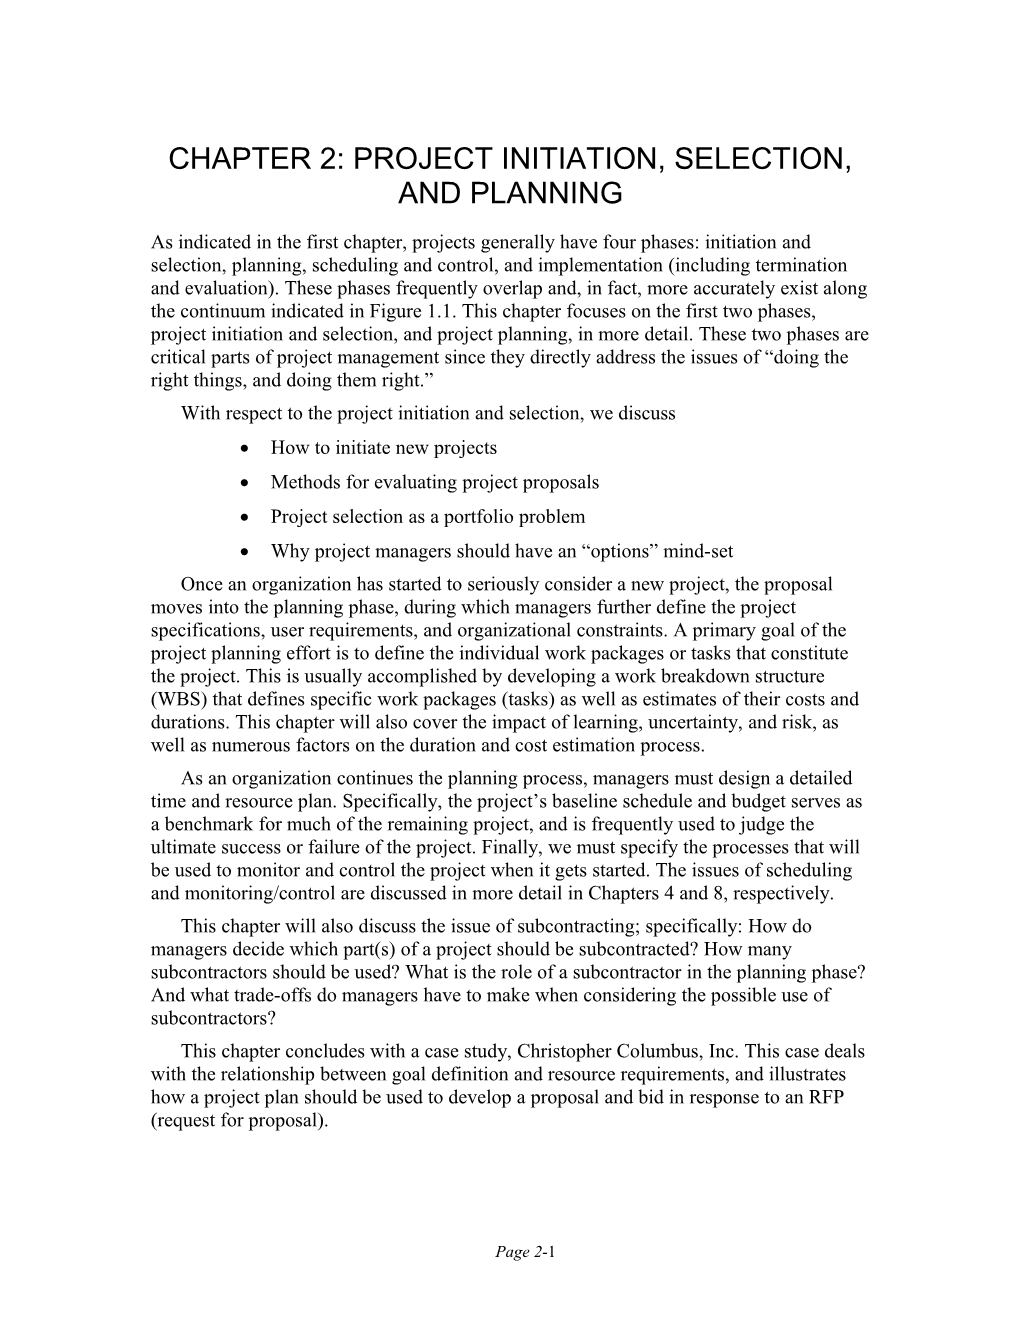 Chapter 2: Project Initiation, Selection, and Planning